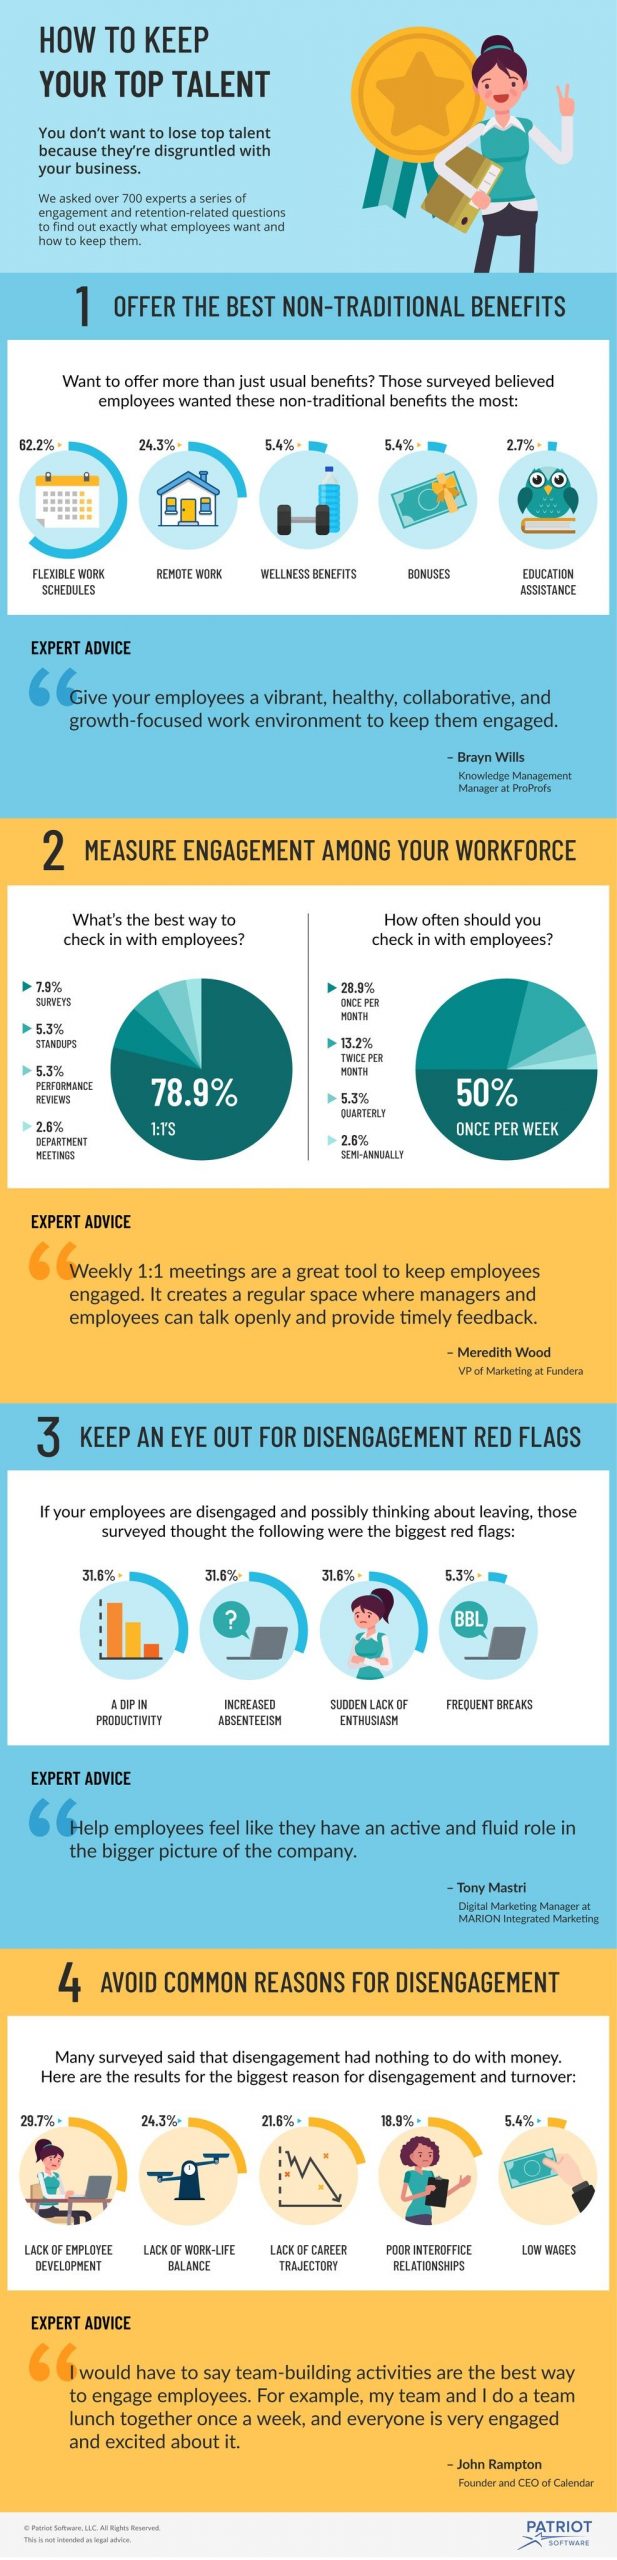 infographic showing survey results for how to keep your top talent